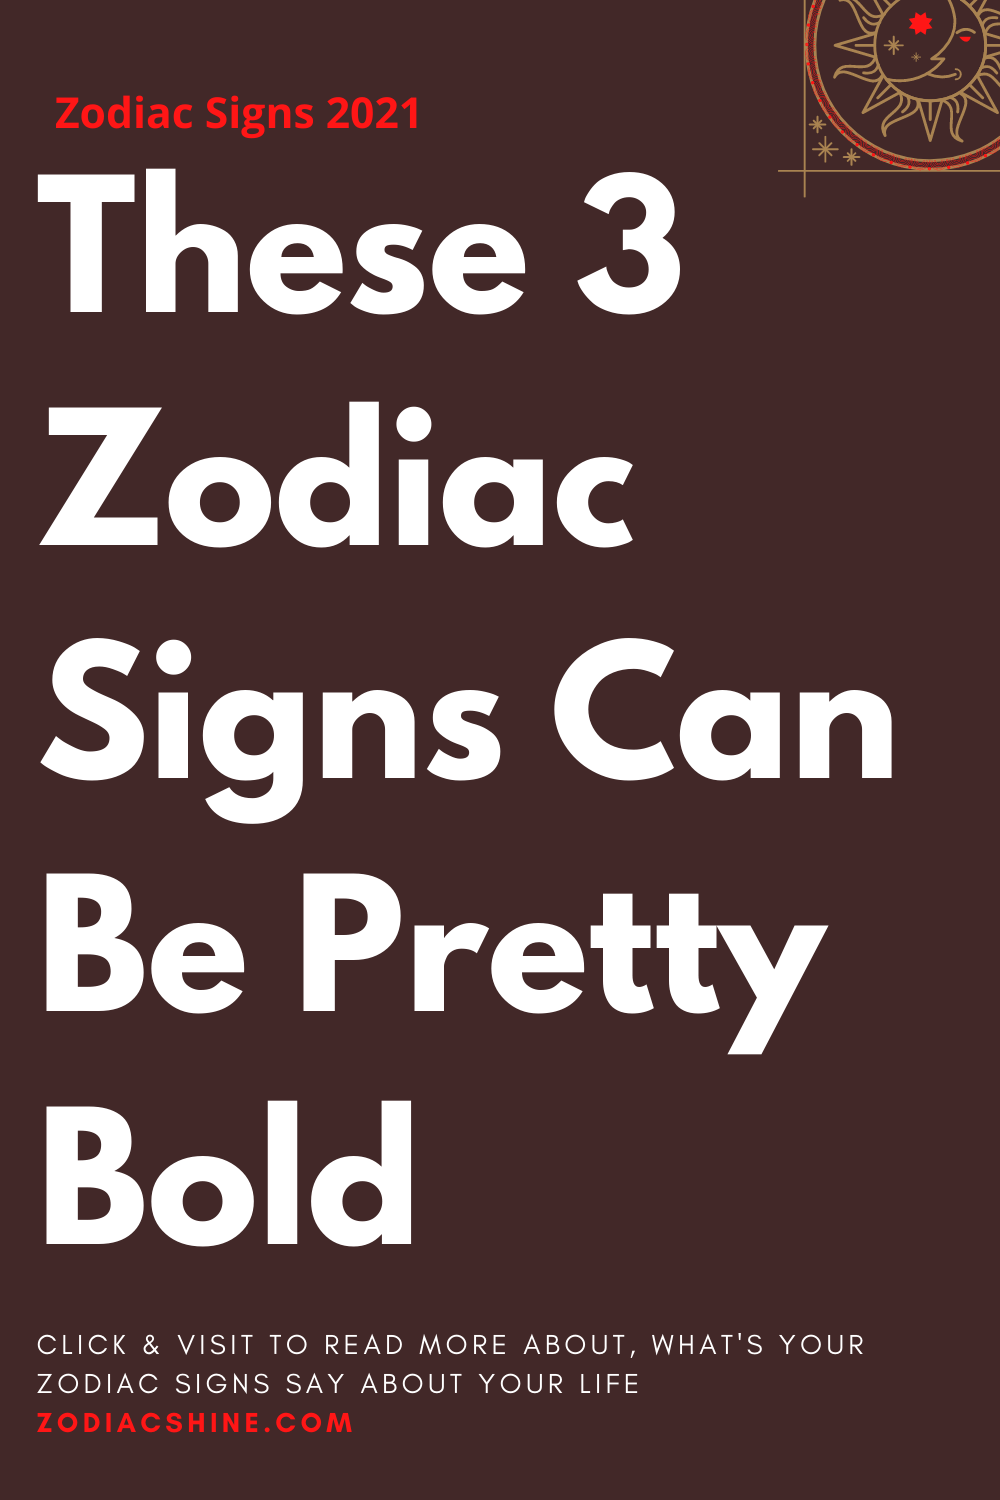 These 3 Zodiac Signs Can Be Pretty Bold